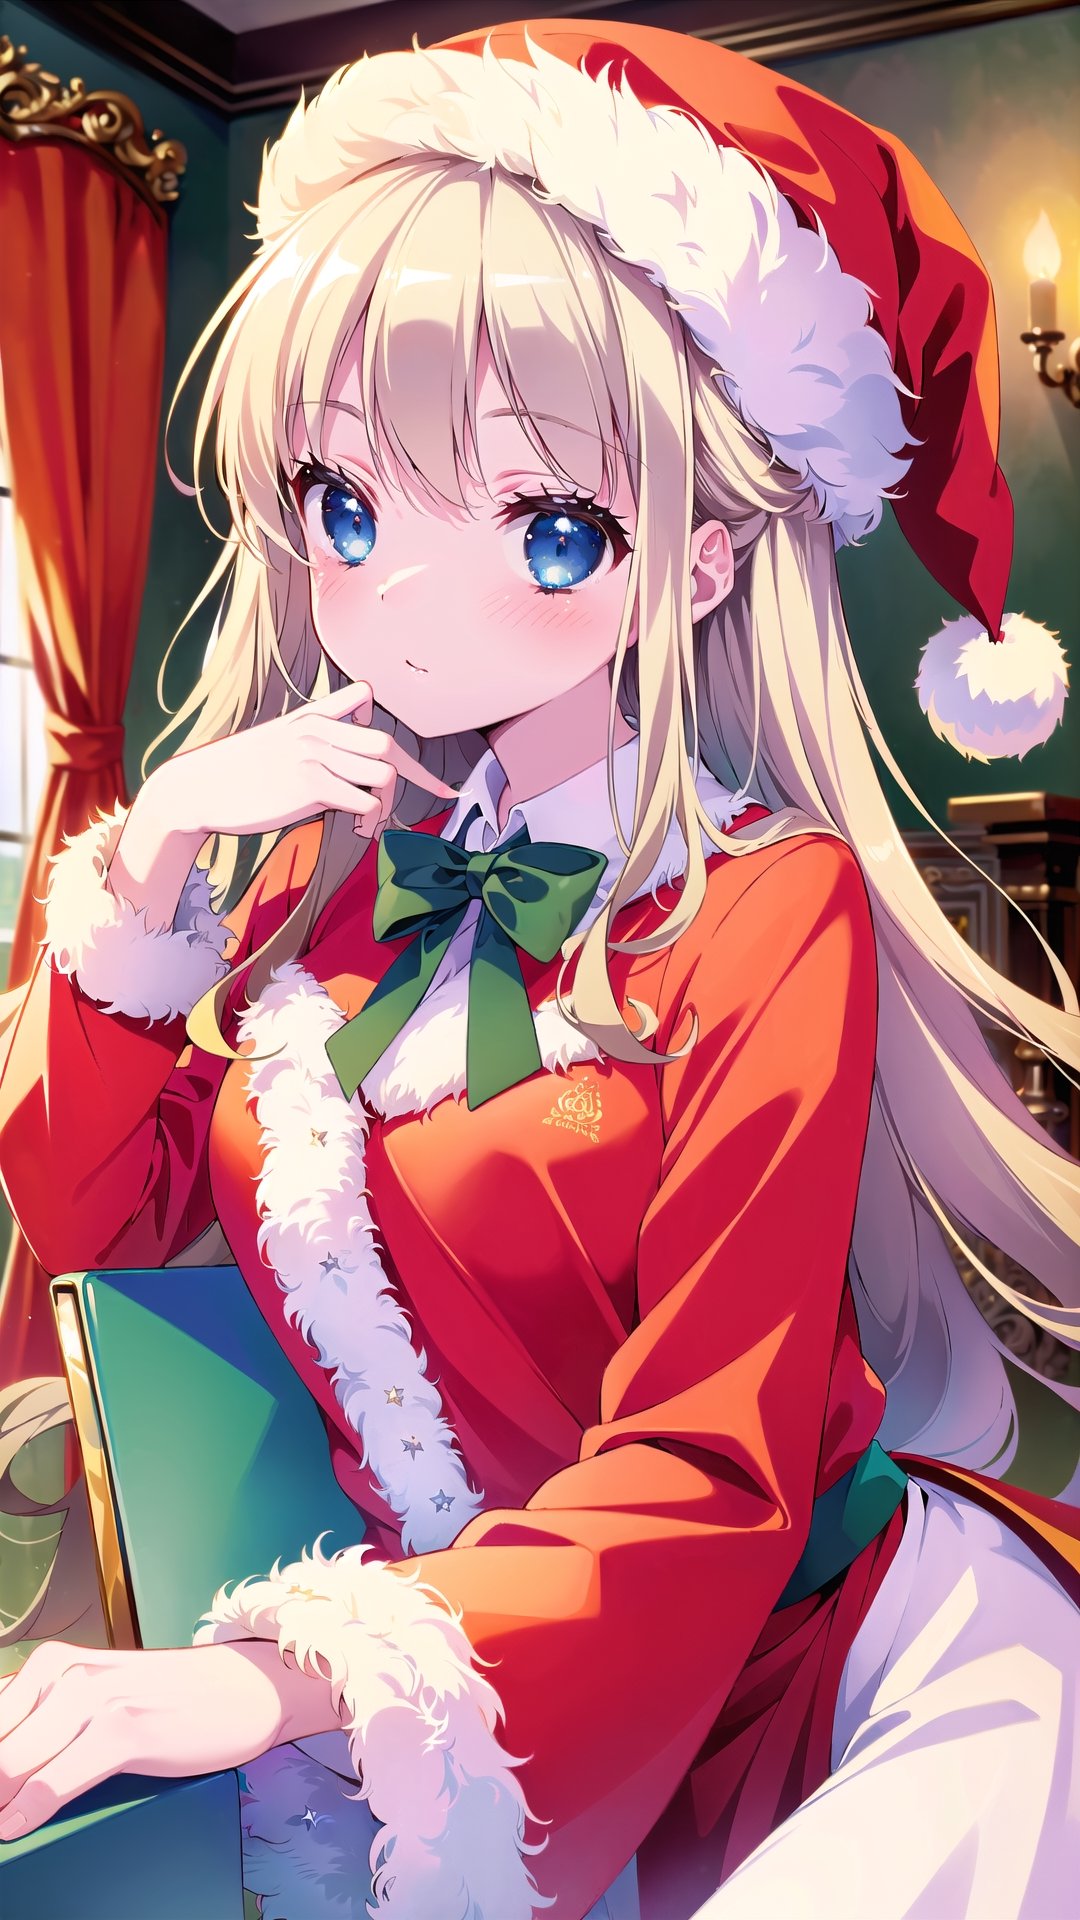 (Masterpiece, Top Quality, High Quality, Best Picture Score: 1.3), Perfect Beauty: 1.5, blonde hair, long hair, (Santa Claus costume), one person, (Santa Claue Hat), inside house, blue_eyes, seductive eyes, seductive_pose, looking away from camera, messy hair,